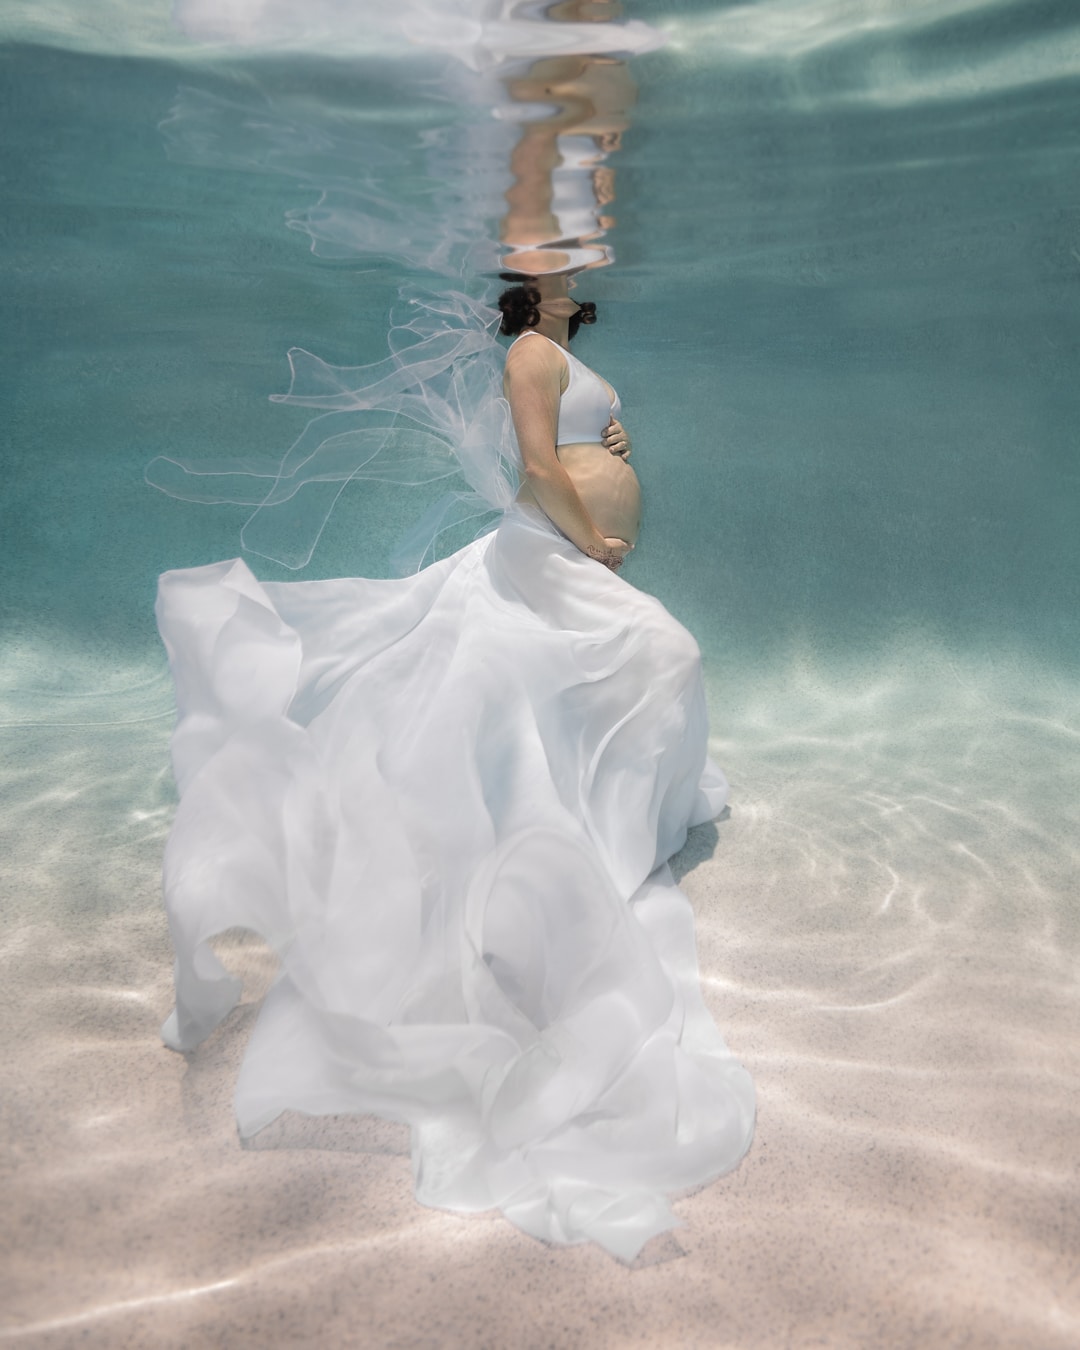 Underwater pregnancy portrait of a woman holding her belly and wearing a flowing white gown